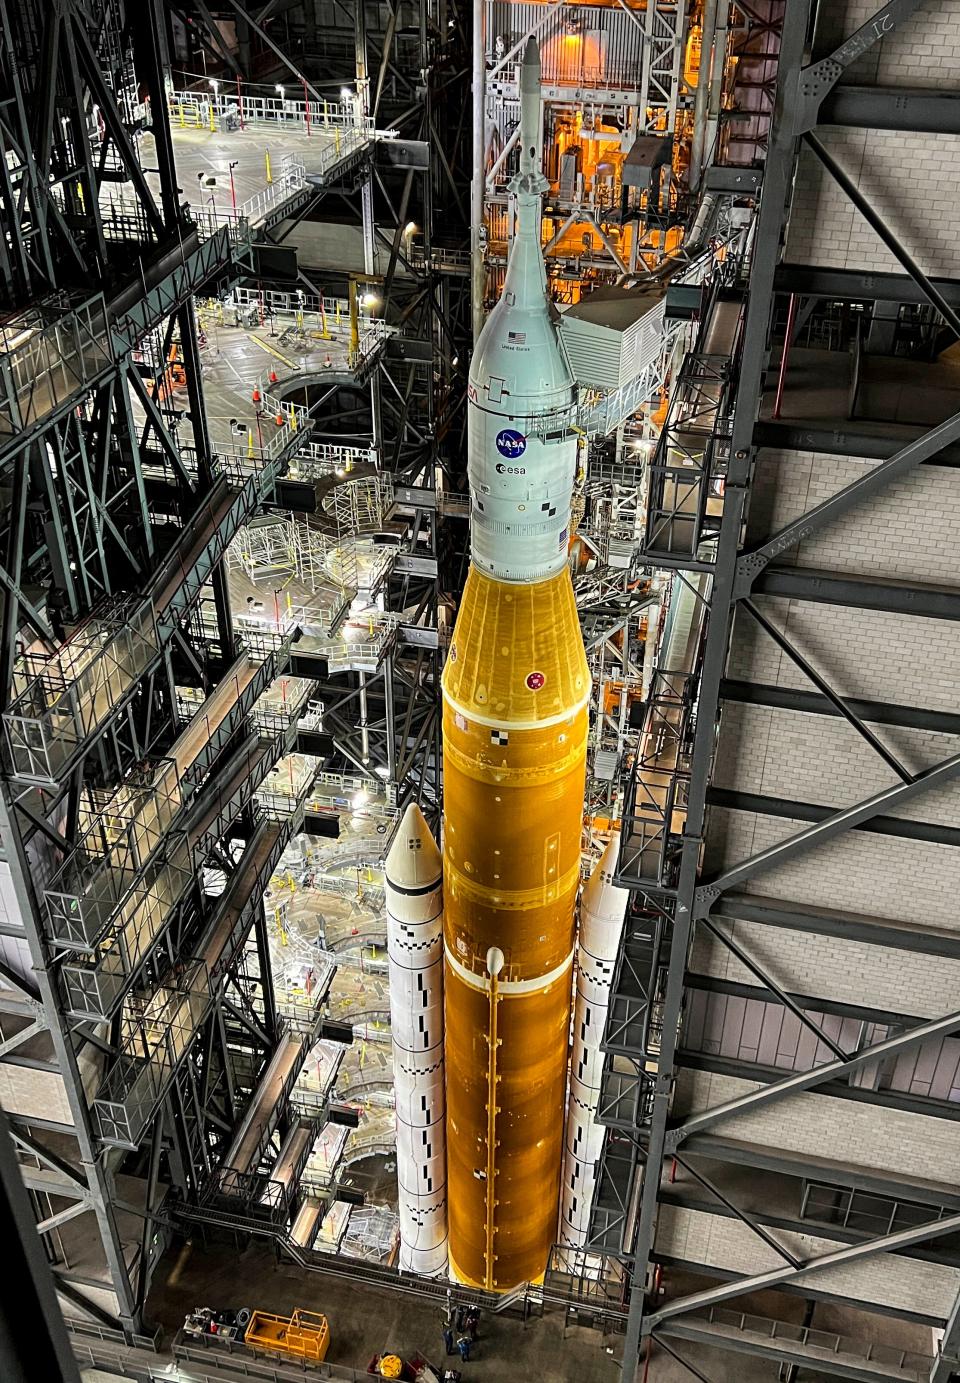 NASA's Artemis I Space Launch System rocket is readied inside the Vehicle Assembly Building at Kennedy Space Center in March 2022. The SLS will launch from Pad 39-B on a mission to the moon. Craig Bailey/FLORIDA TODAY via USA TODAY NETWORK